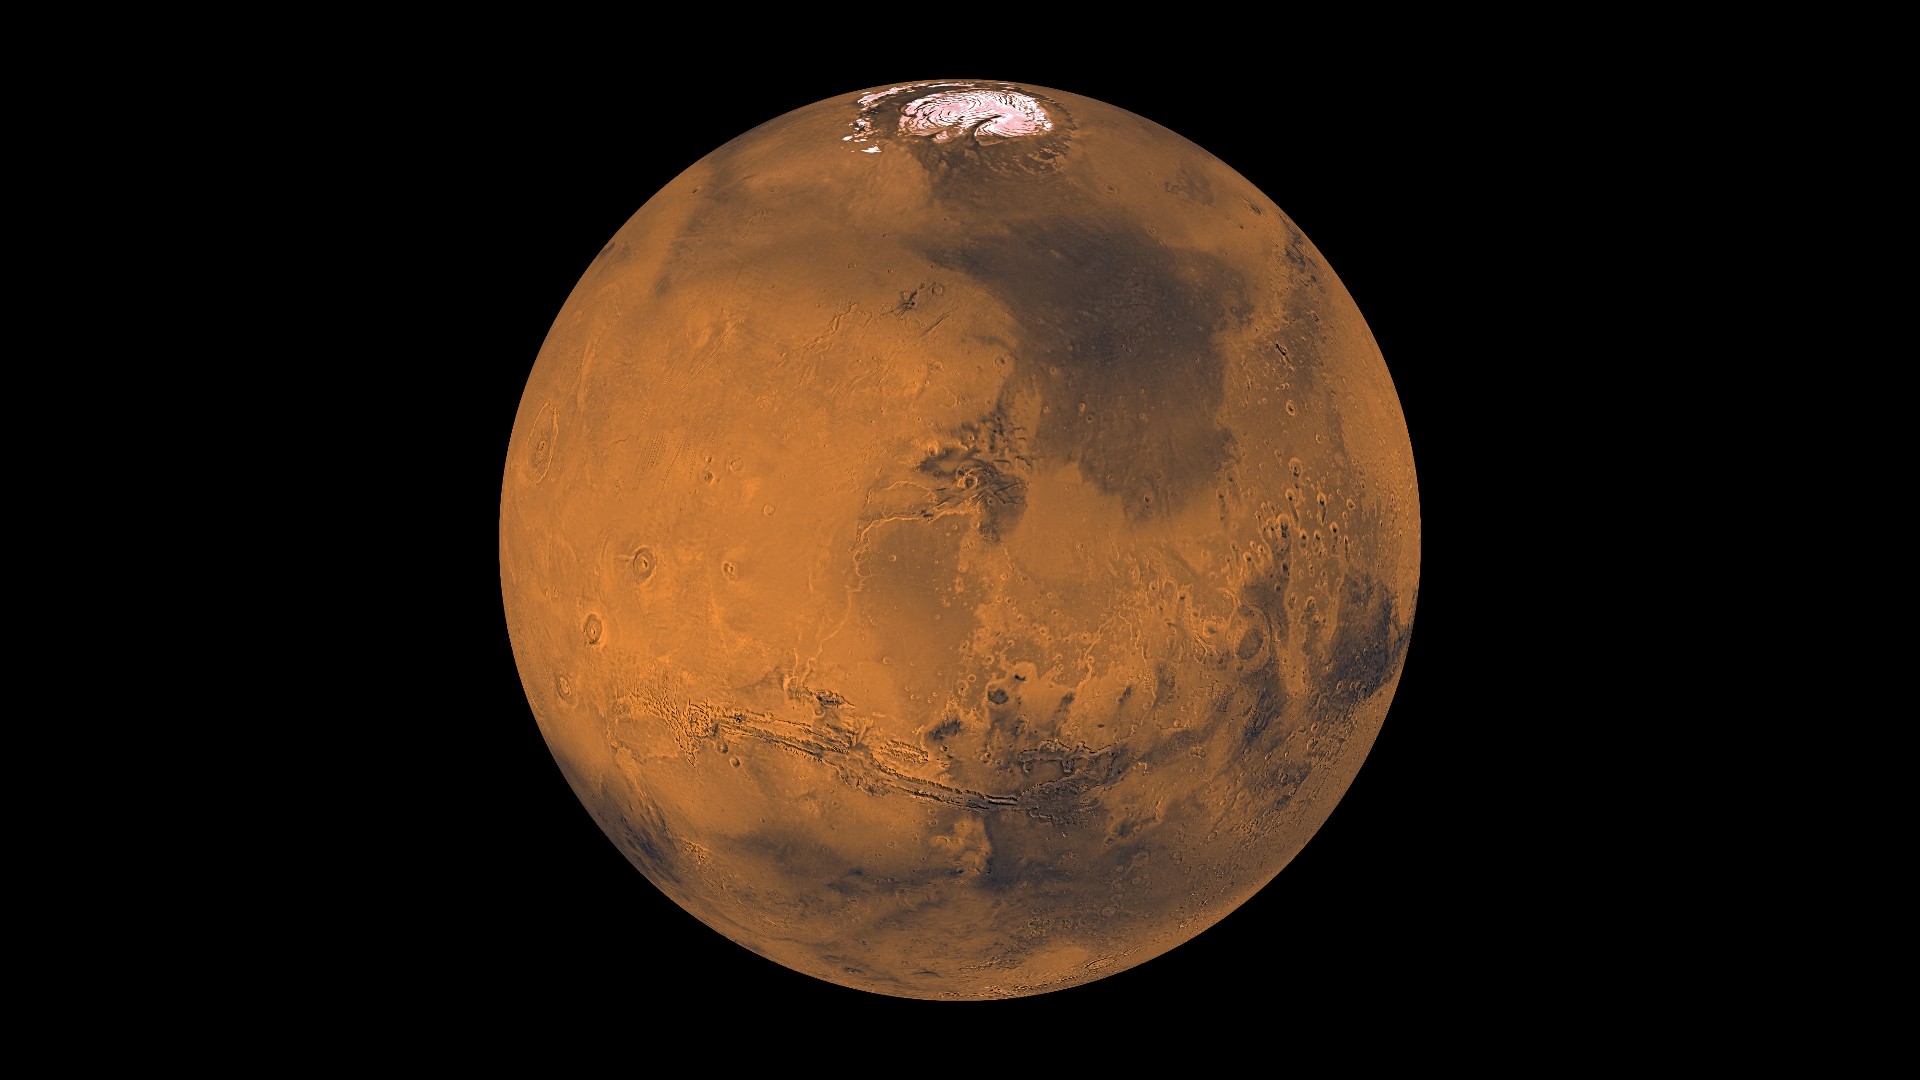 the universe 04 mars the red planet